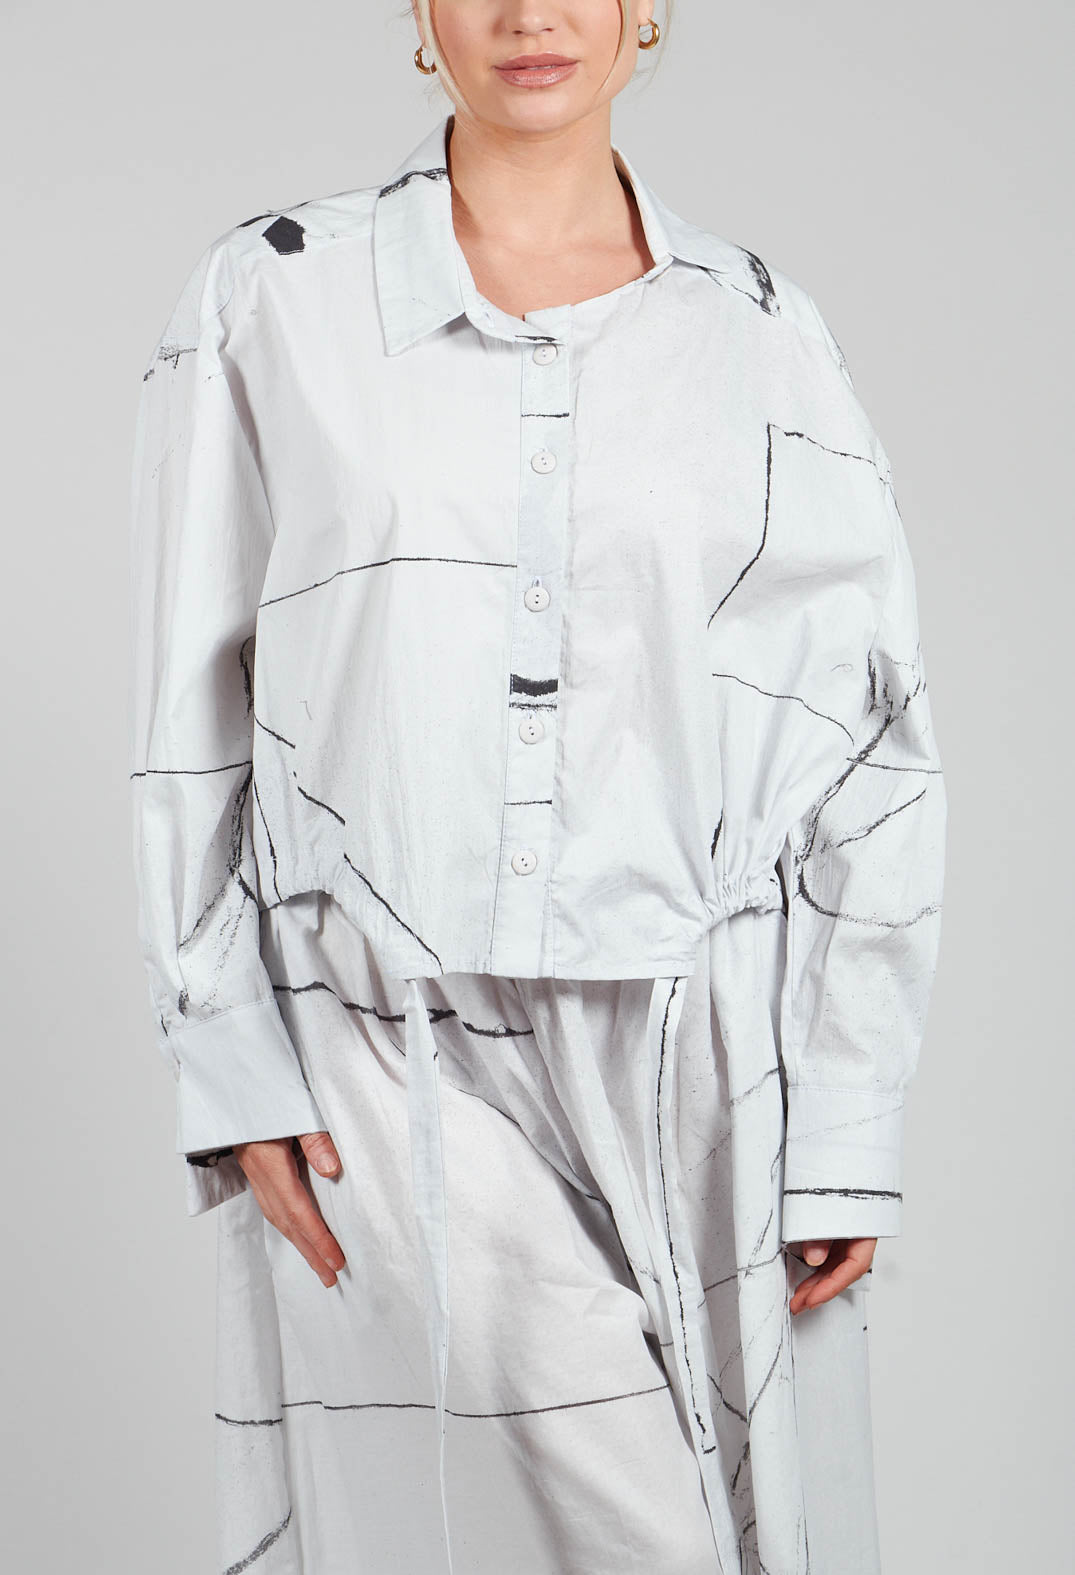 Recta Shirt in Off White Banner